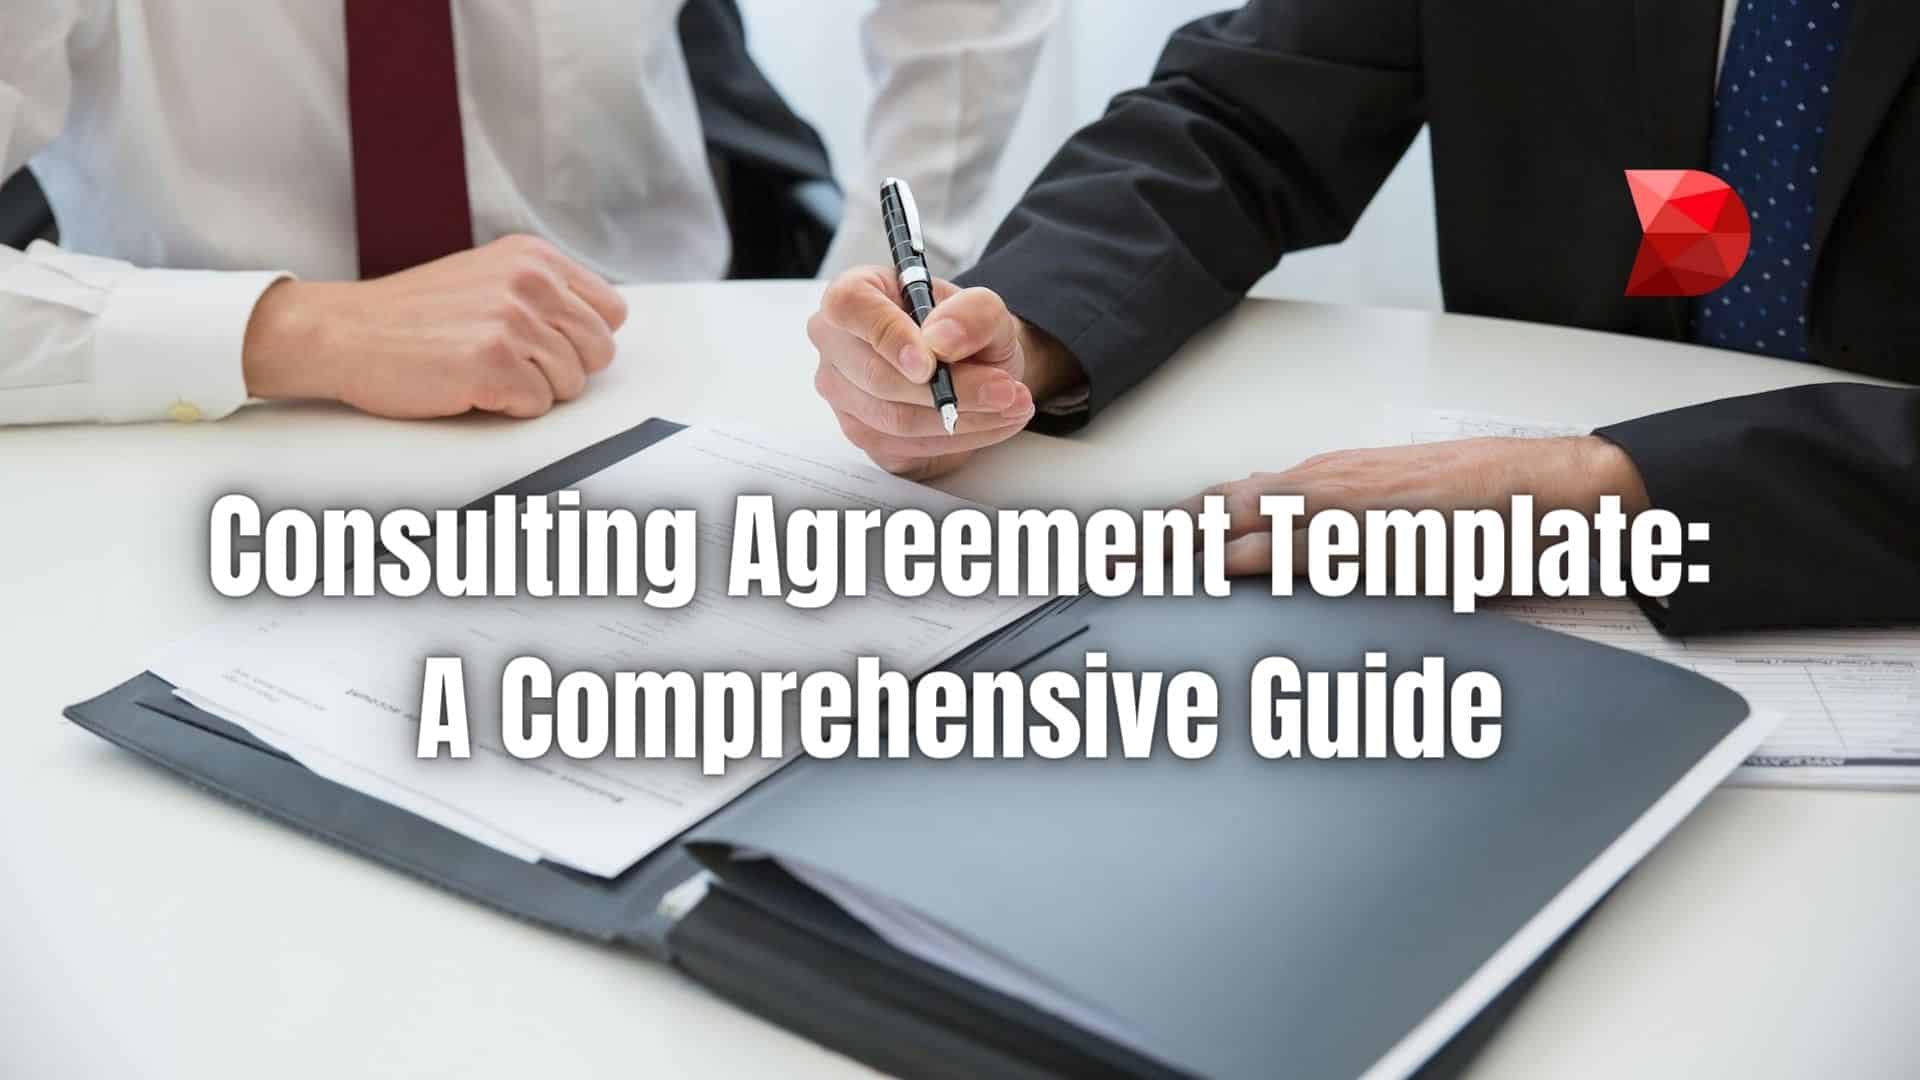 Navigate the complexities of consulting agreement templates effortlessly. Learn essential clauses and tips for airtight contracts.